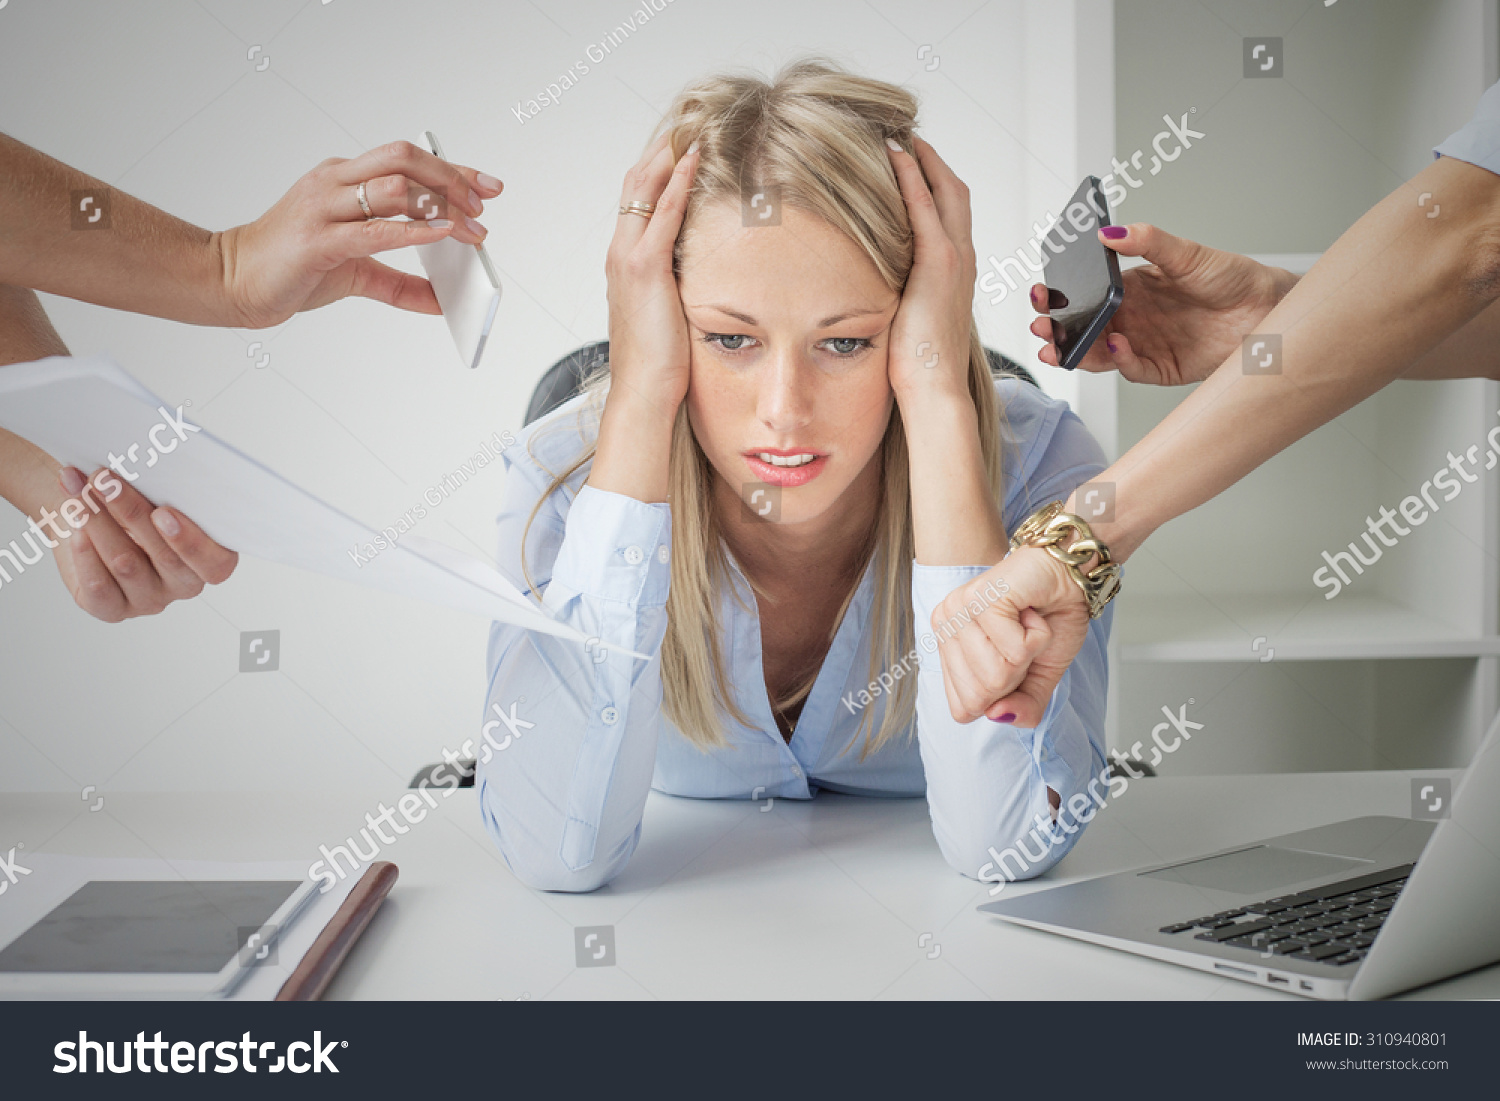 Depressed business woman #310940801